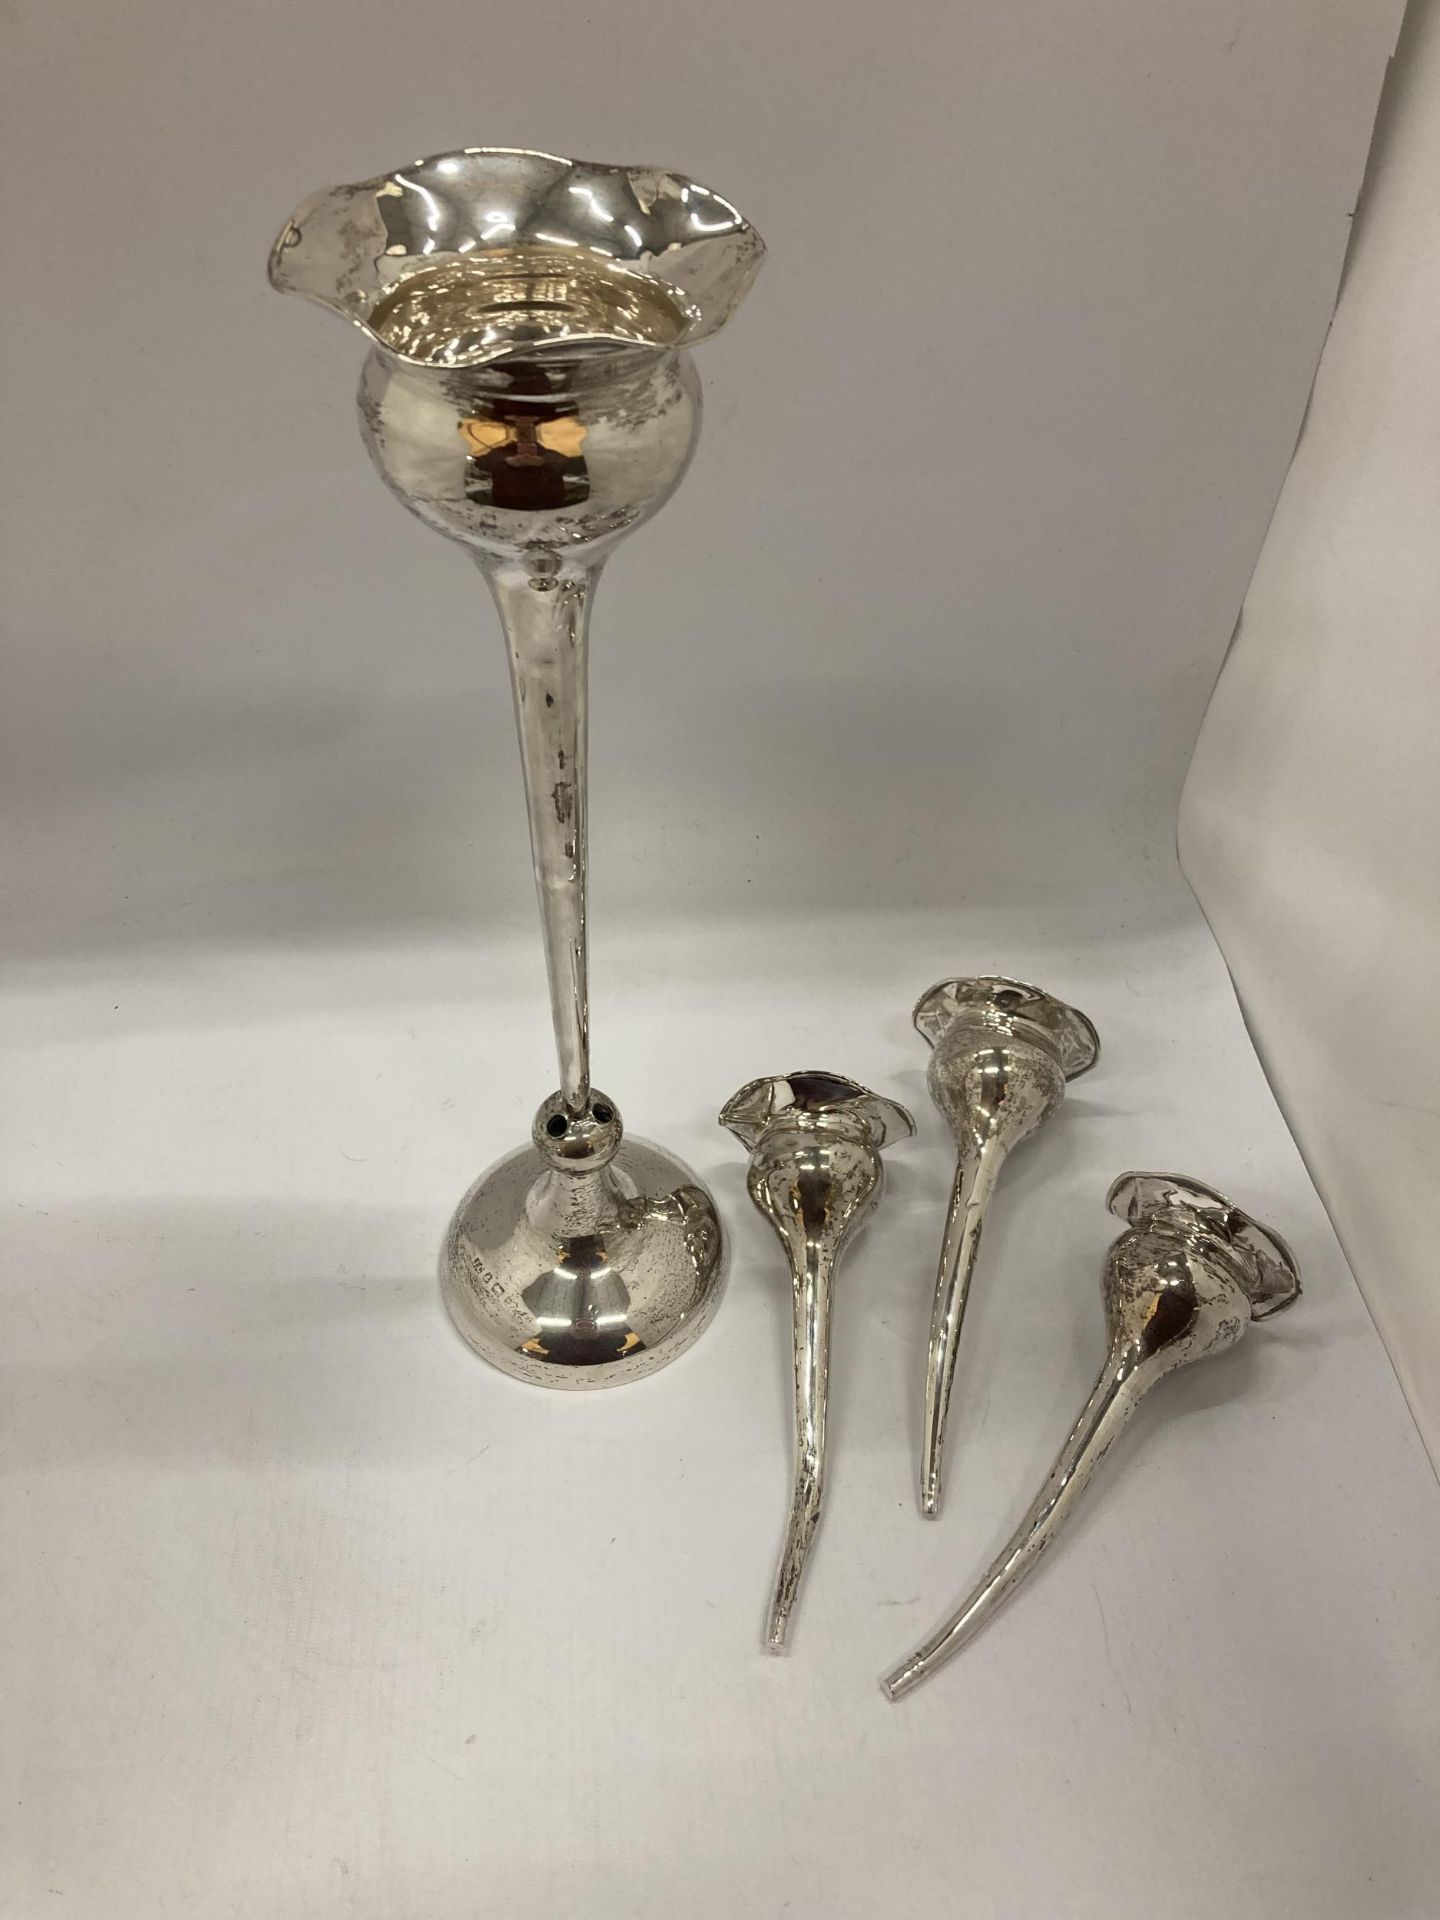 AN EARLY 20TH CENTURY BIRMINGHAM HALLMARKED SILVER EPERGNE WITH THREE DETACHABLE POSIES, MAKER J. - Image 3 of 4